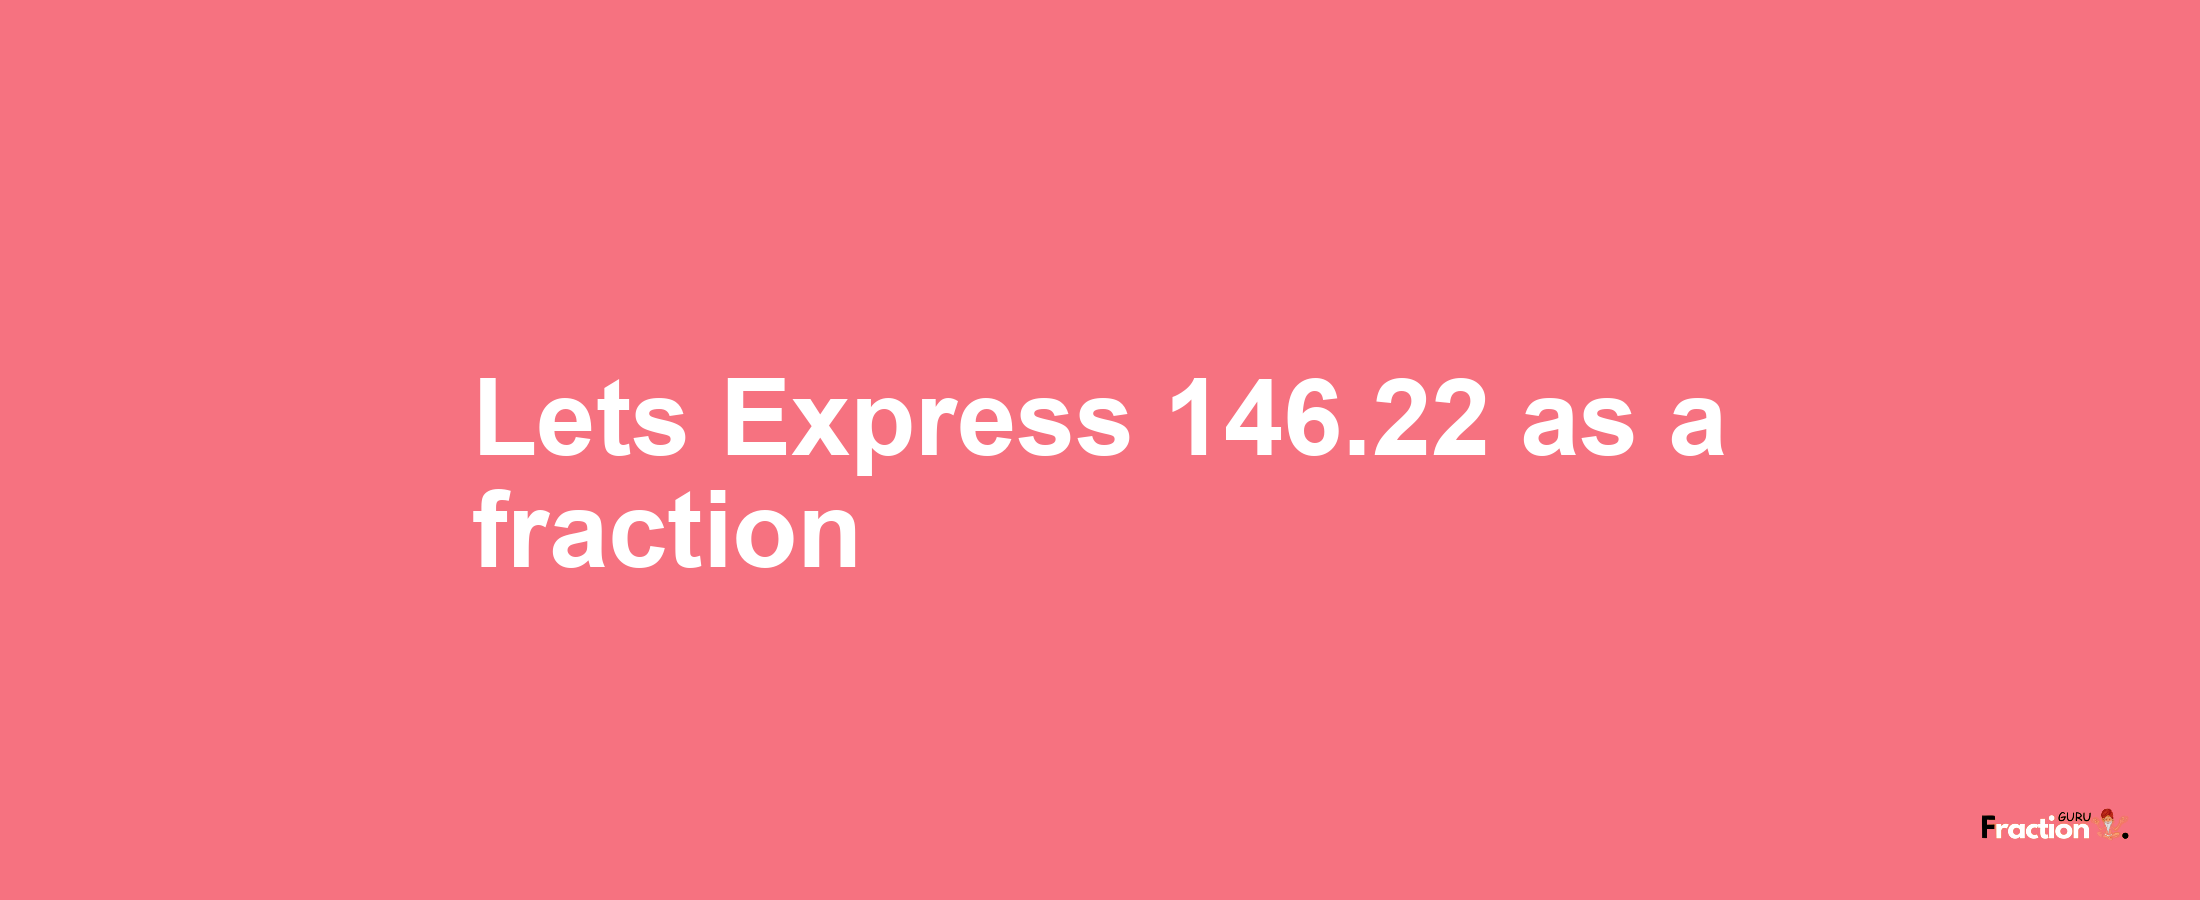 Lets Express 146.22 as afraction